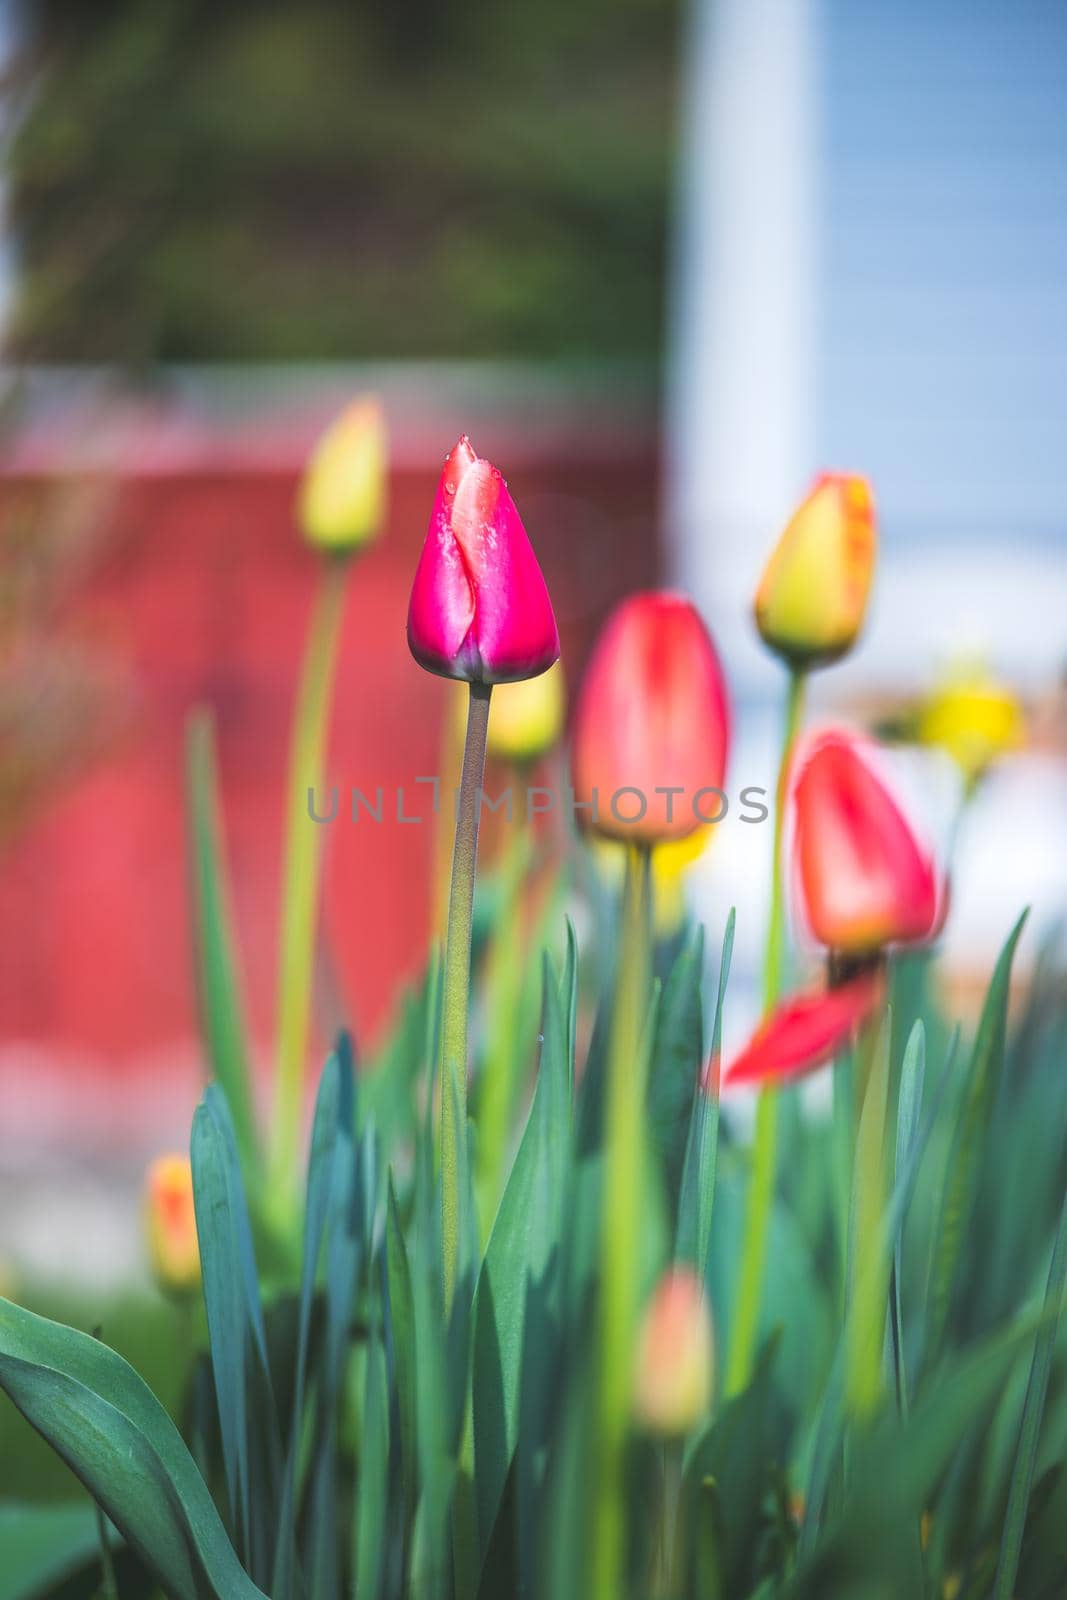 Spring time flower scenery: Colorful spring flowers with tulips and narcissus by Daxenbichler